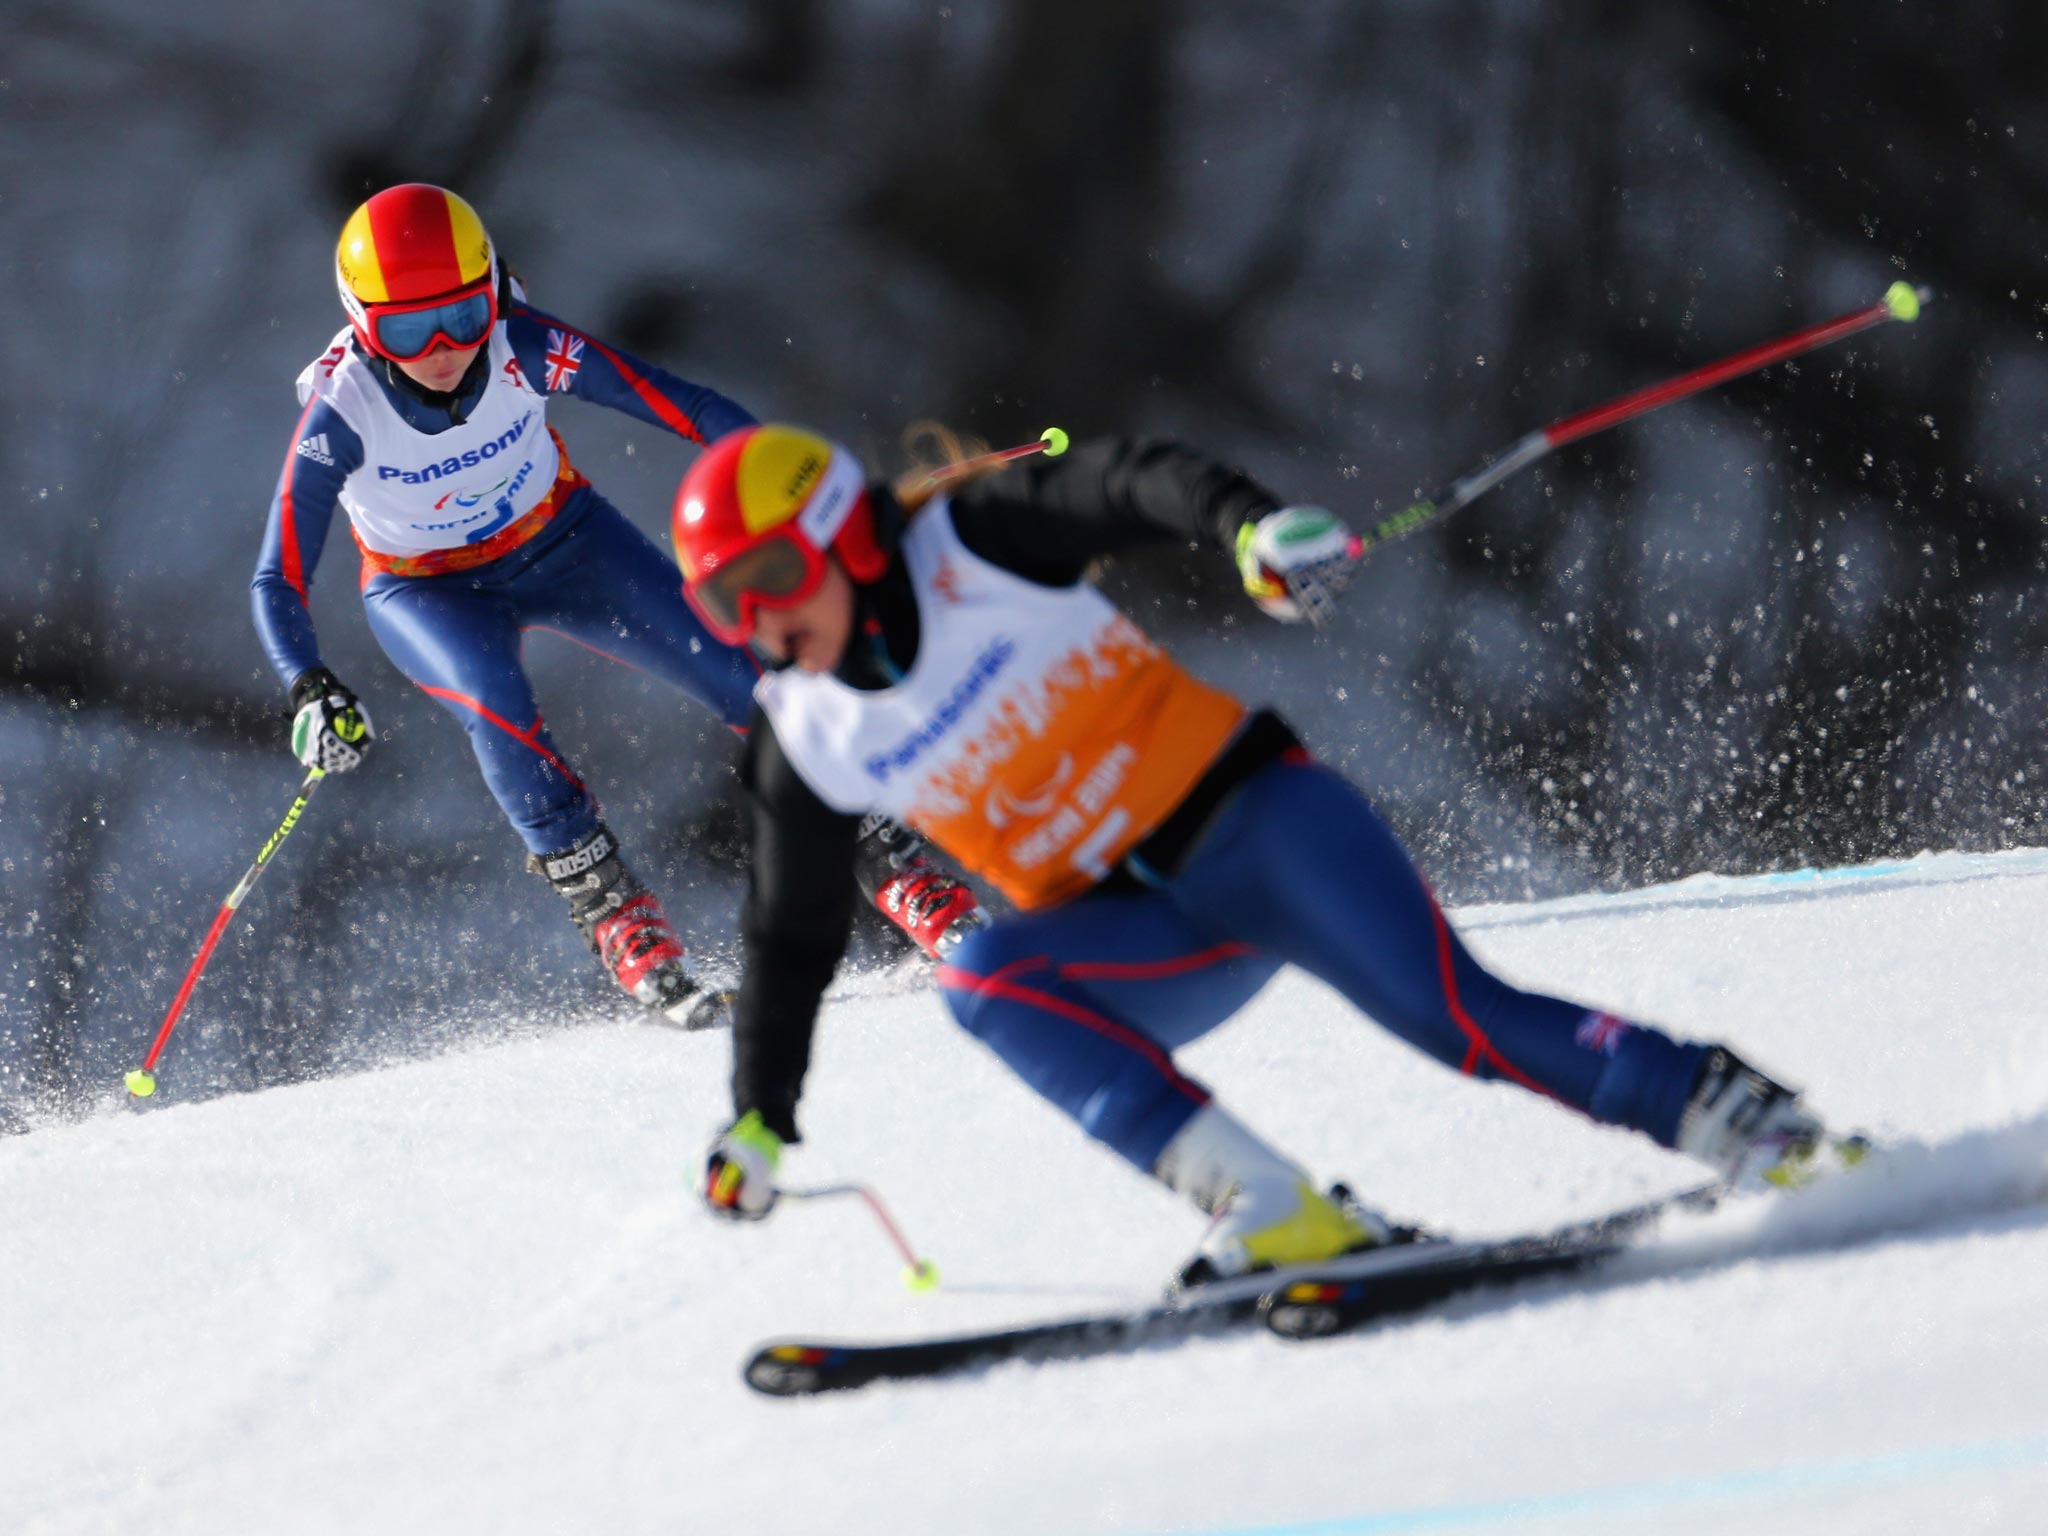 Kelly Gallagher (L) and Charlotte Evans (R) on their way to gold in the Winter Paralympics super-G